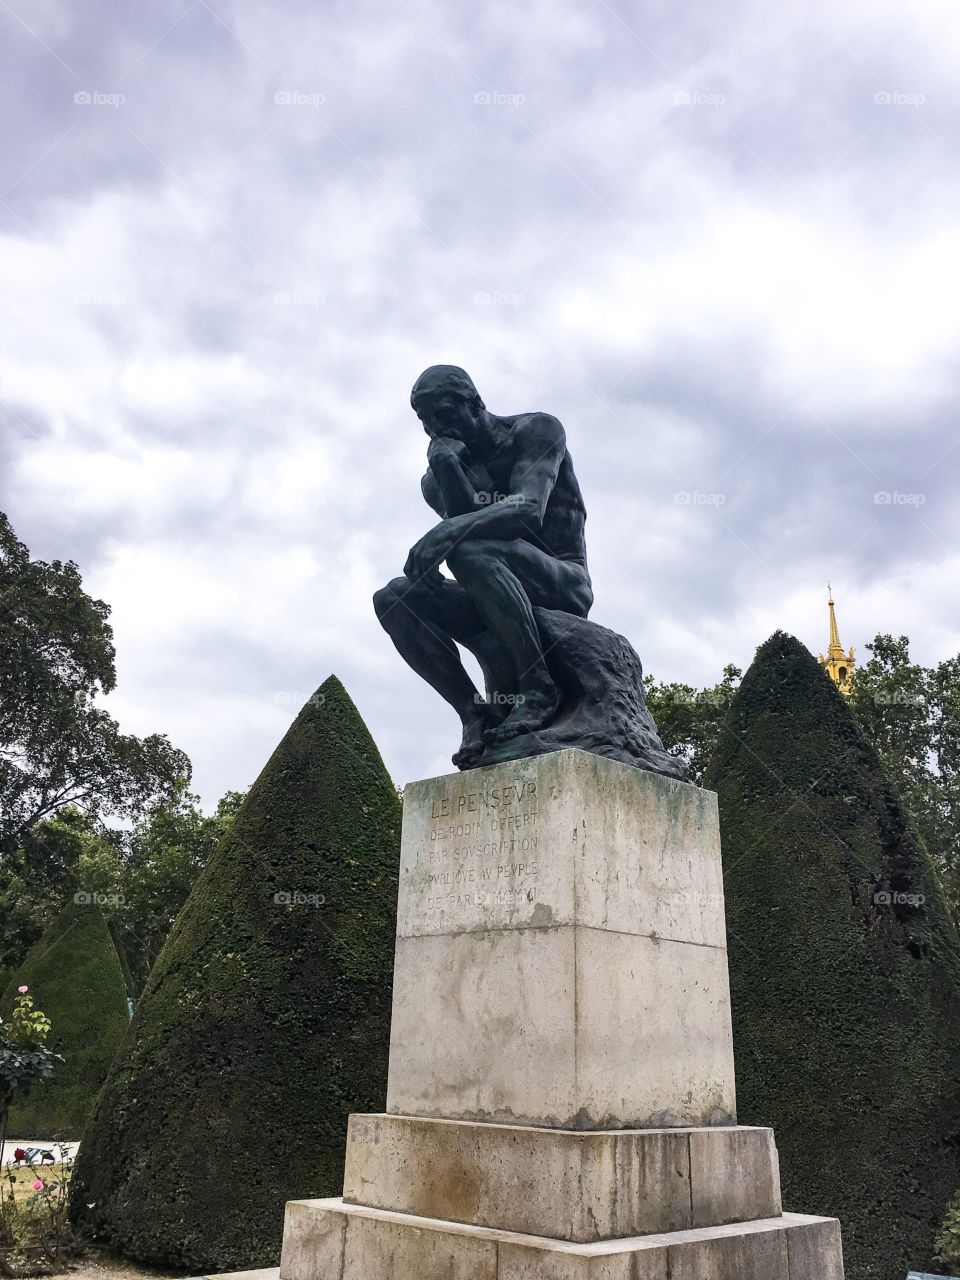 A picture of The Thinker at the Rodin museum in Paris. He is against a cloudy sky.